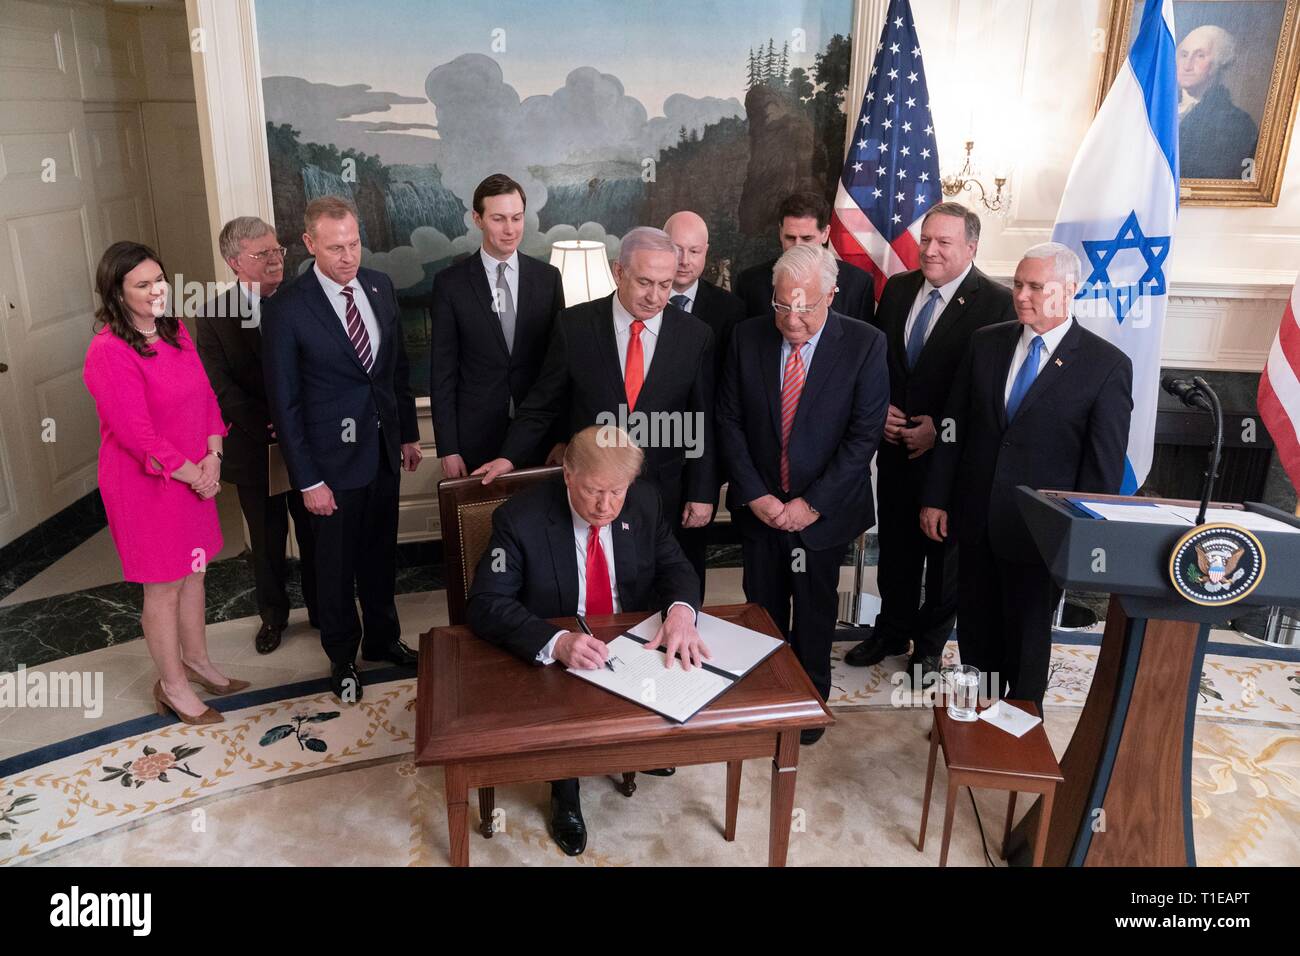 Washington DC, USA. 25th Mar 2019. U.S. President Donald Trump joined by Vice President Mike Pence and Israeli Prime Minister Benjamin Netanyahu signs a proclamation formally recognizing Israeli sovereignty over the Golan Heights in the Diplomatic Reception Room of the White House March 25, 2019 in Washington, D.C. Credit: Planetpix/Alamy Live News Stock Photo